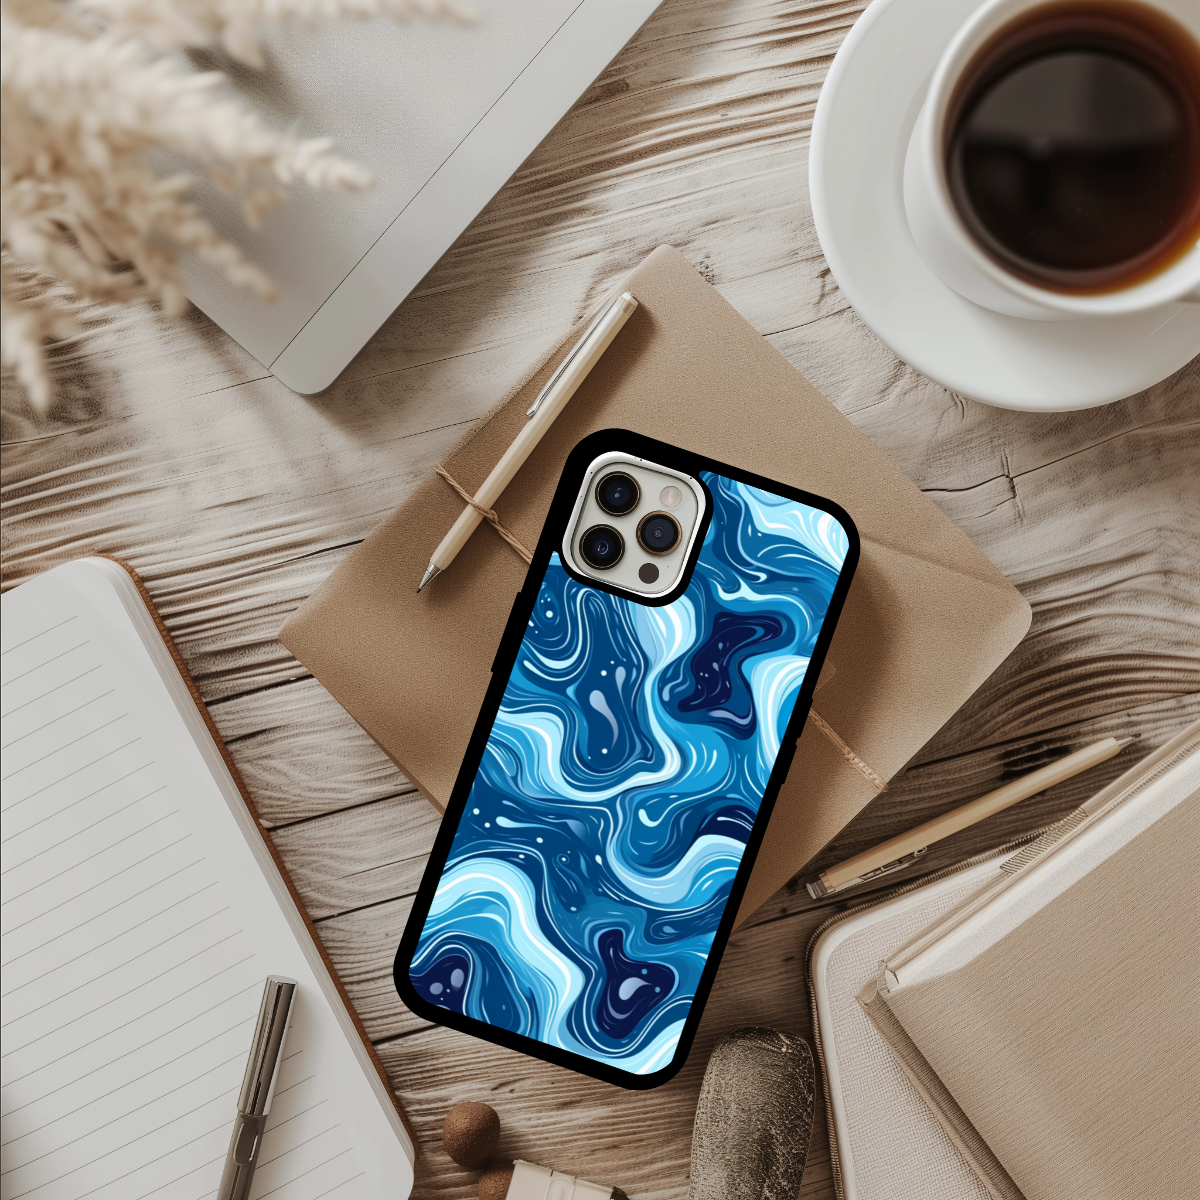 Swirl Pattern Phone Case - Ocean Blue phone case the perfect gift for her - cute phone case - best birthday gift - iphone case - girly phone case - pretty phone case - Blue phone case